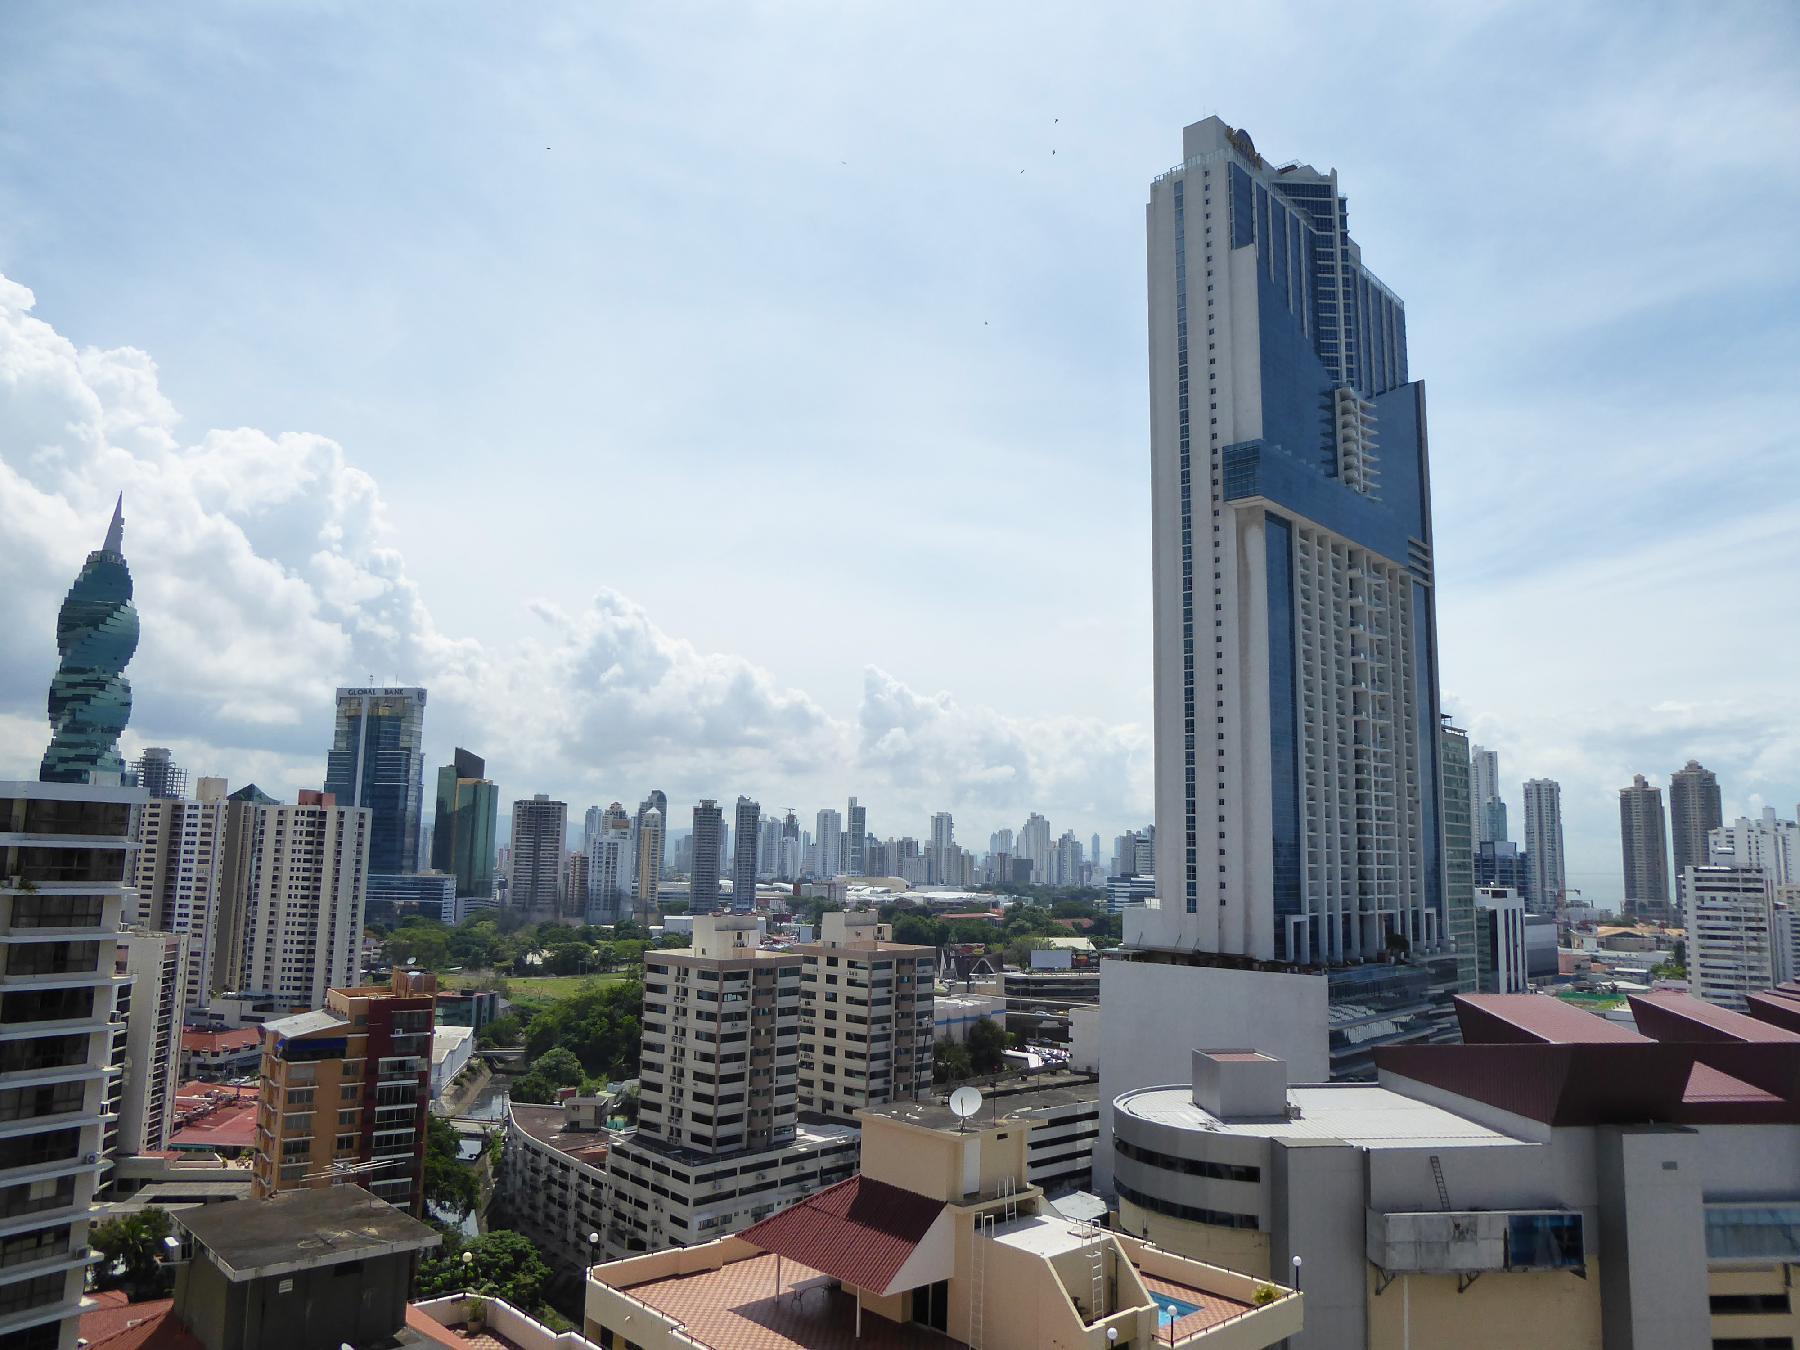 Top 3 Ideal Neighborhoods for Expats in Panama City